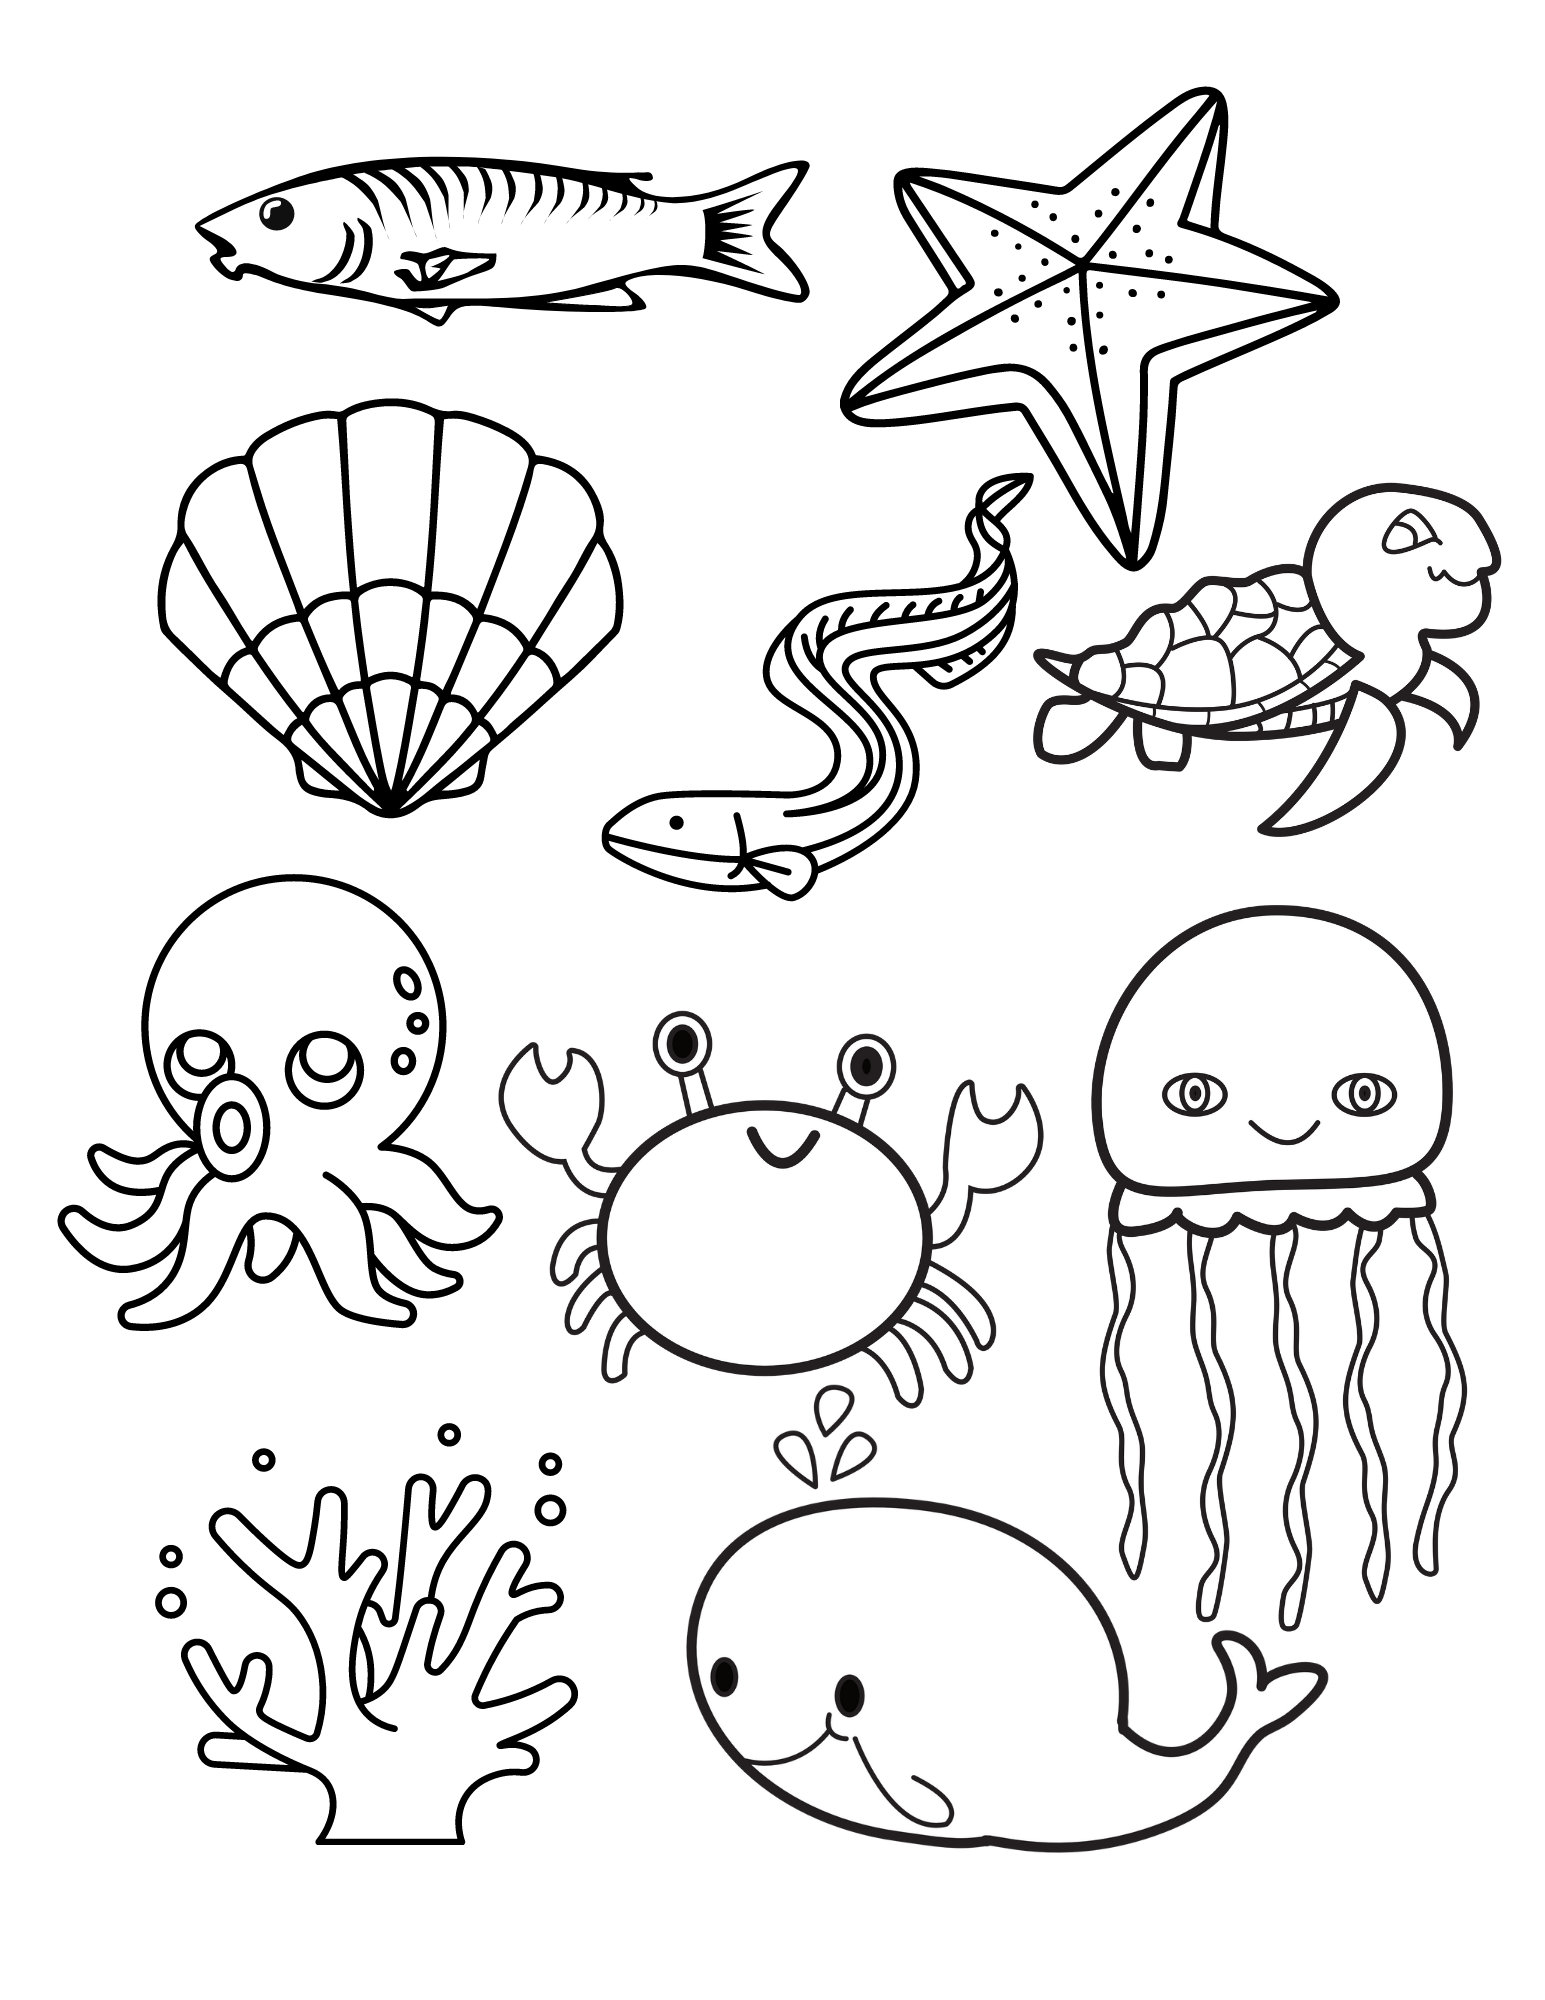 Ocean creatures printable coloring page x print at home